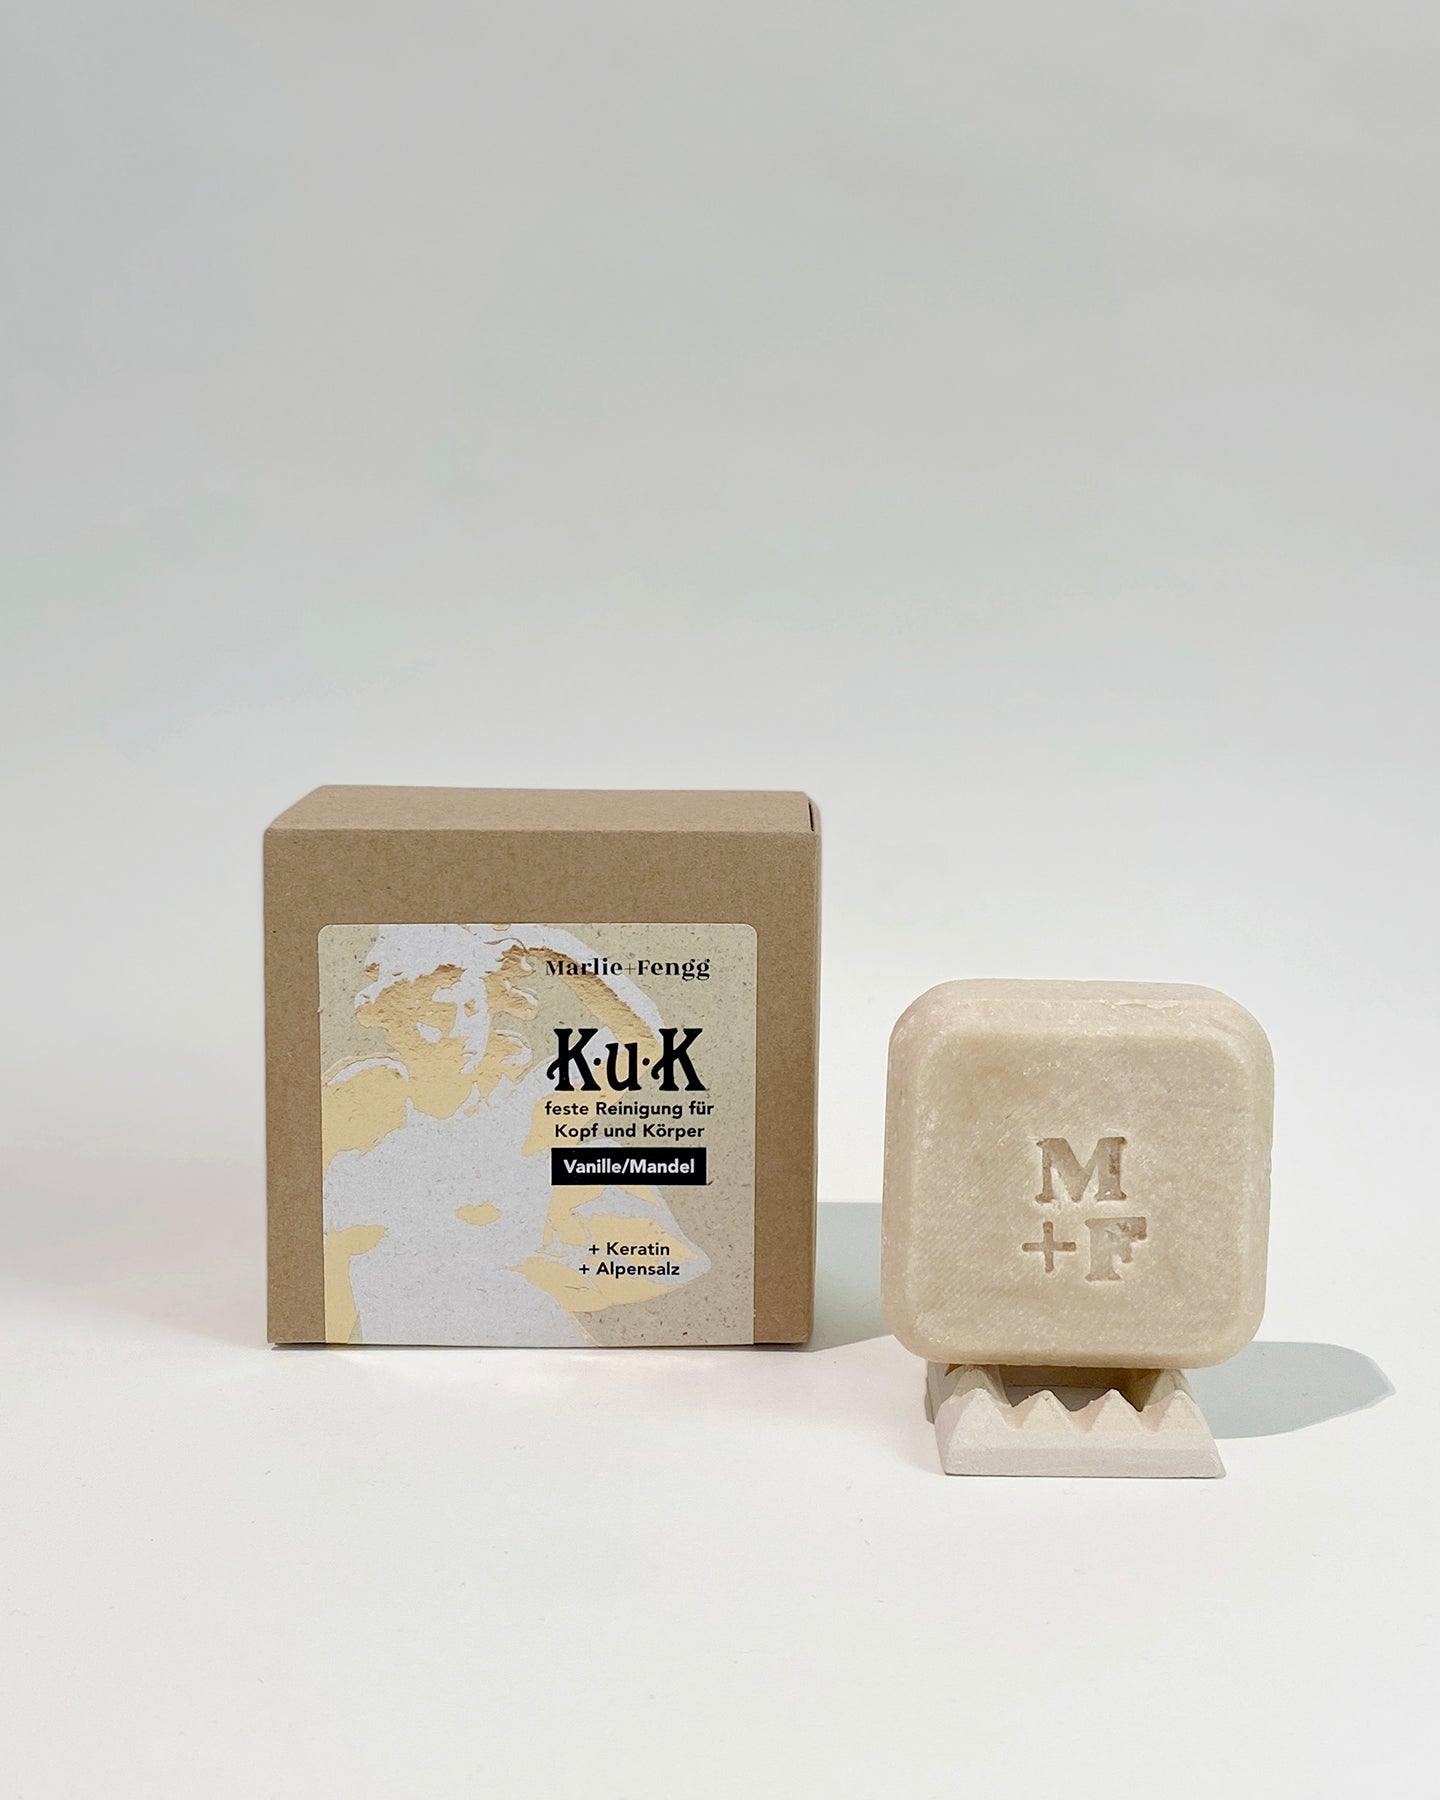 K.u.K - Solid cleansing for head and body